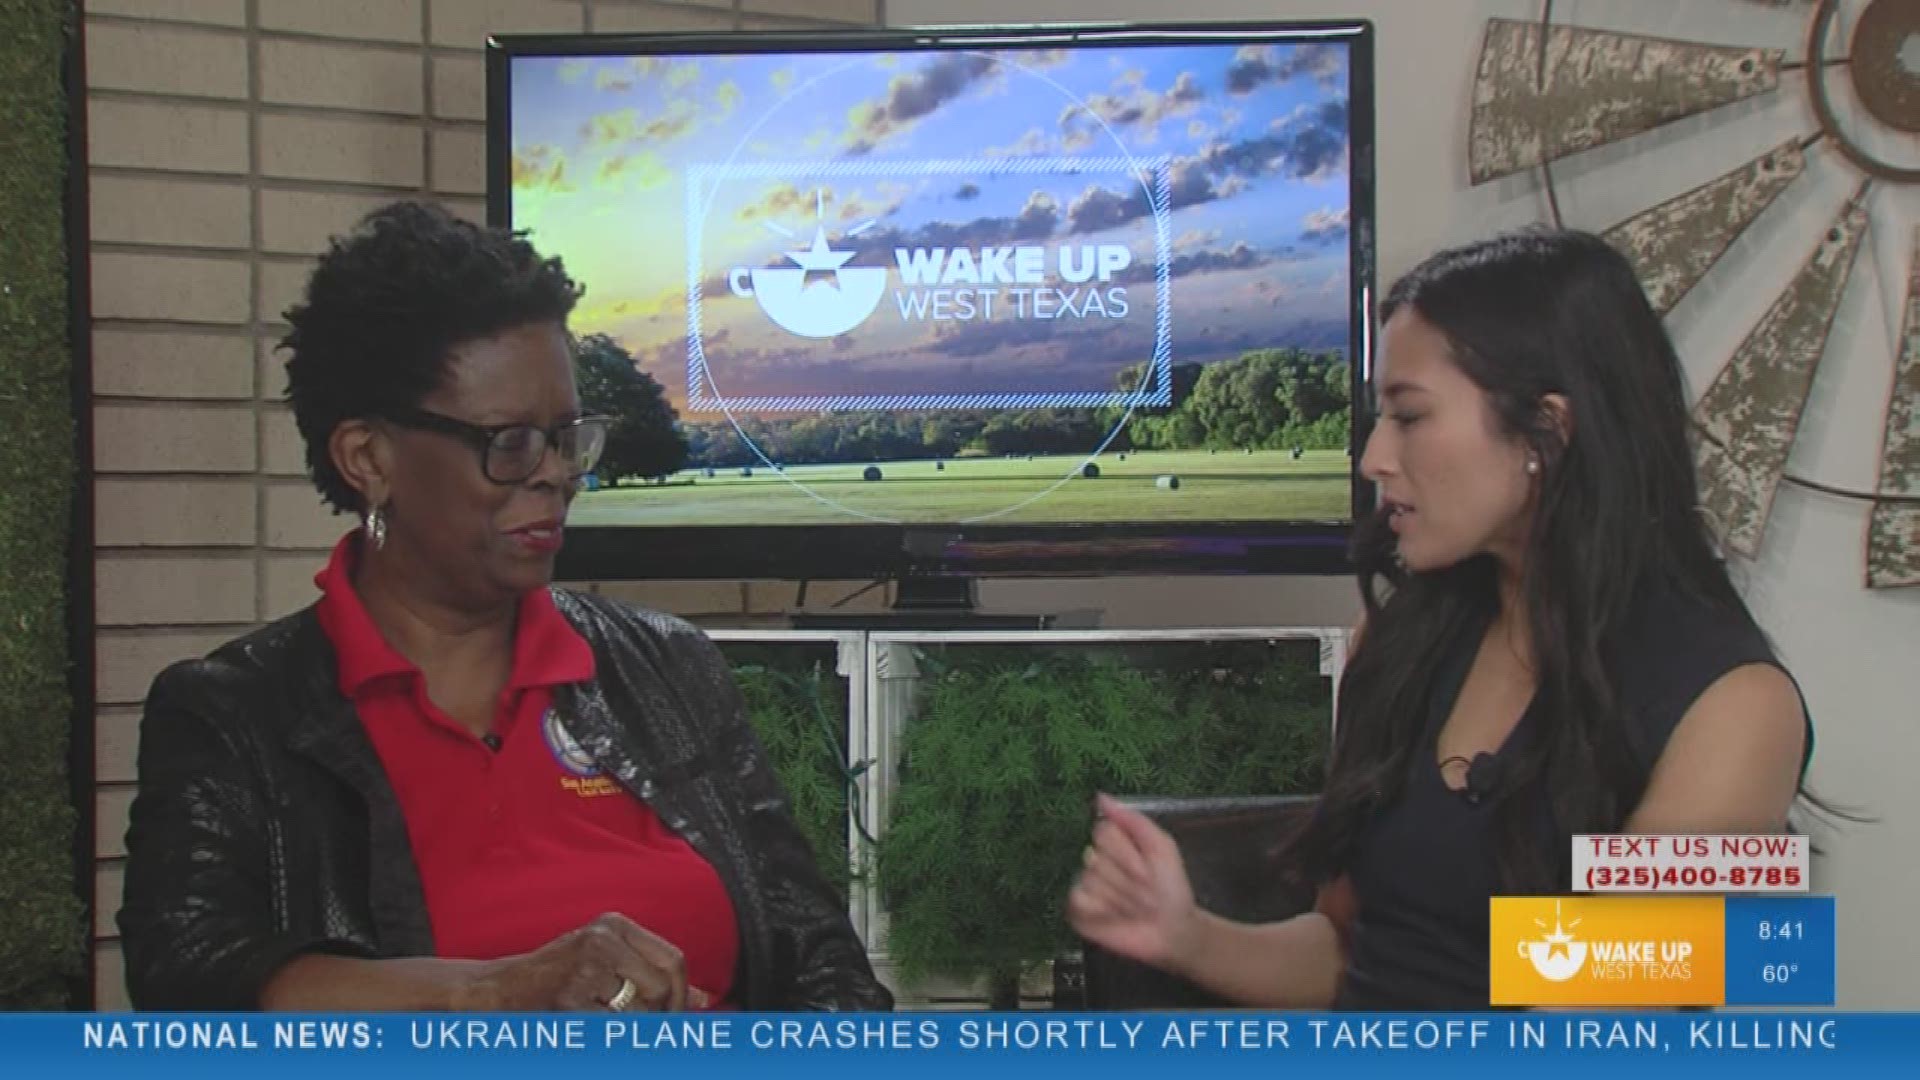 Our Camille Requiestas spoke to Sherley Spears, president of the NAACP San Angelo chapter, about the upcoming event to honor the late Dr. Martin Luther King, Jr.